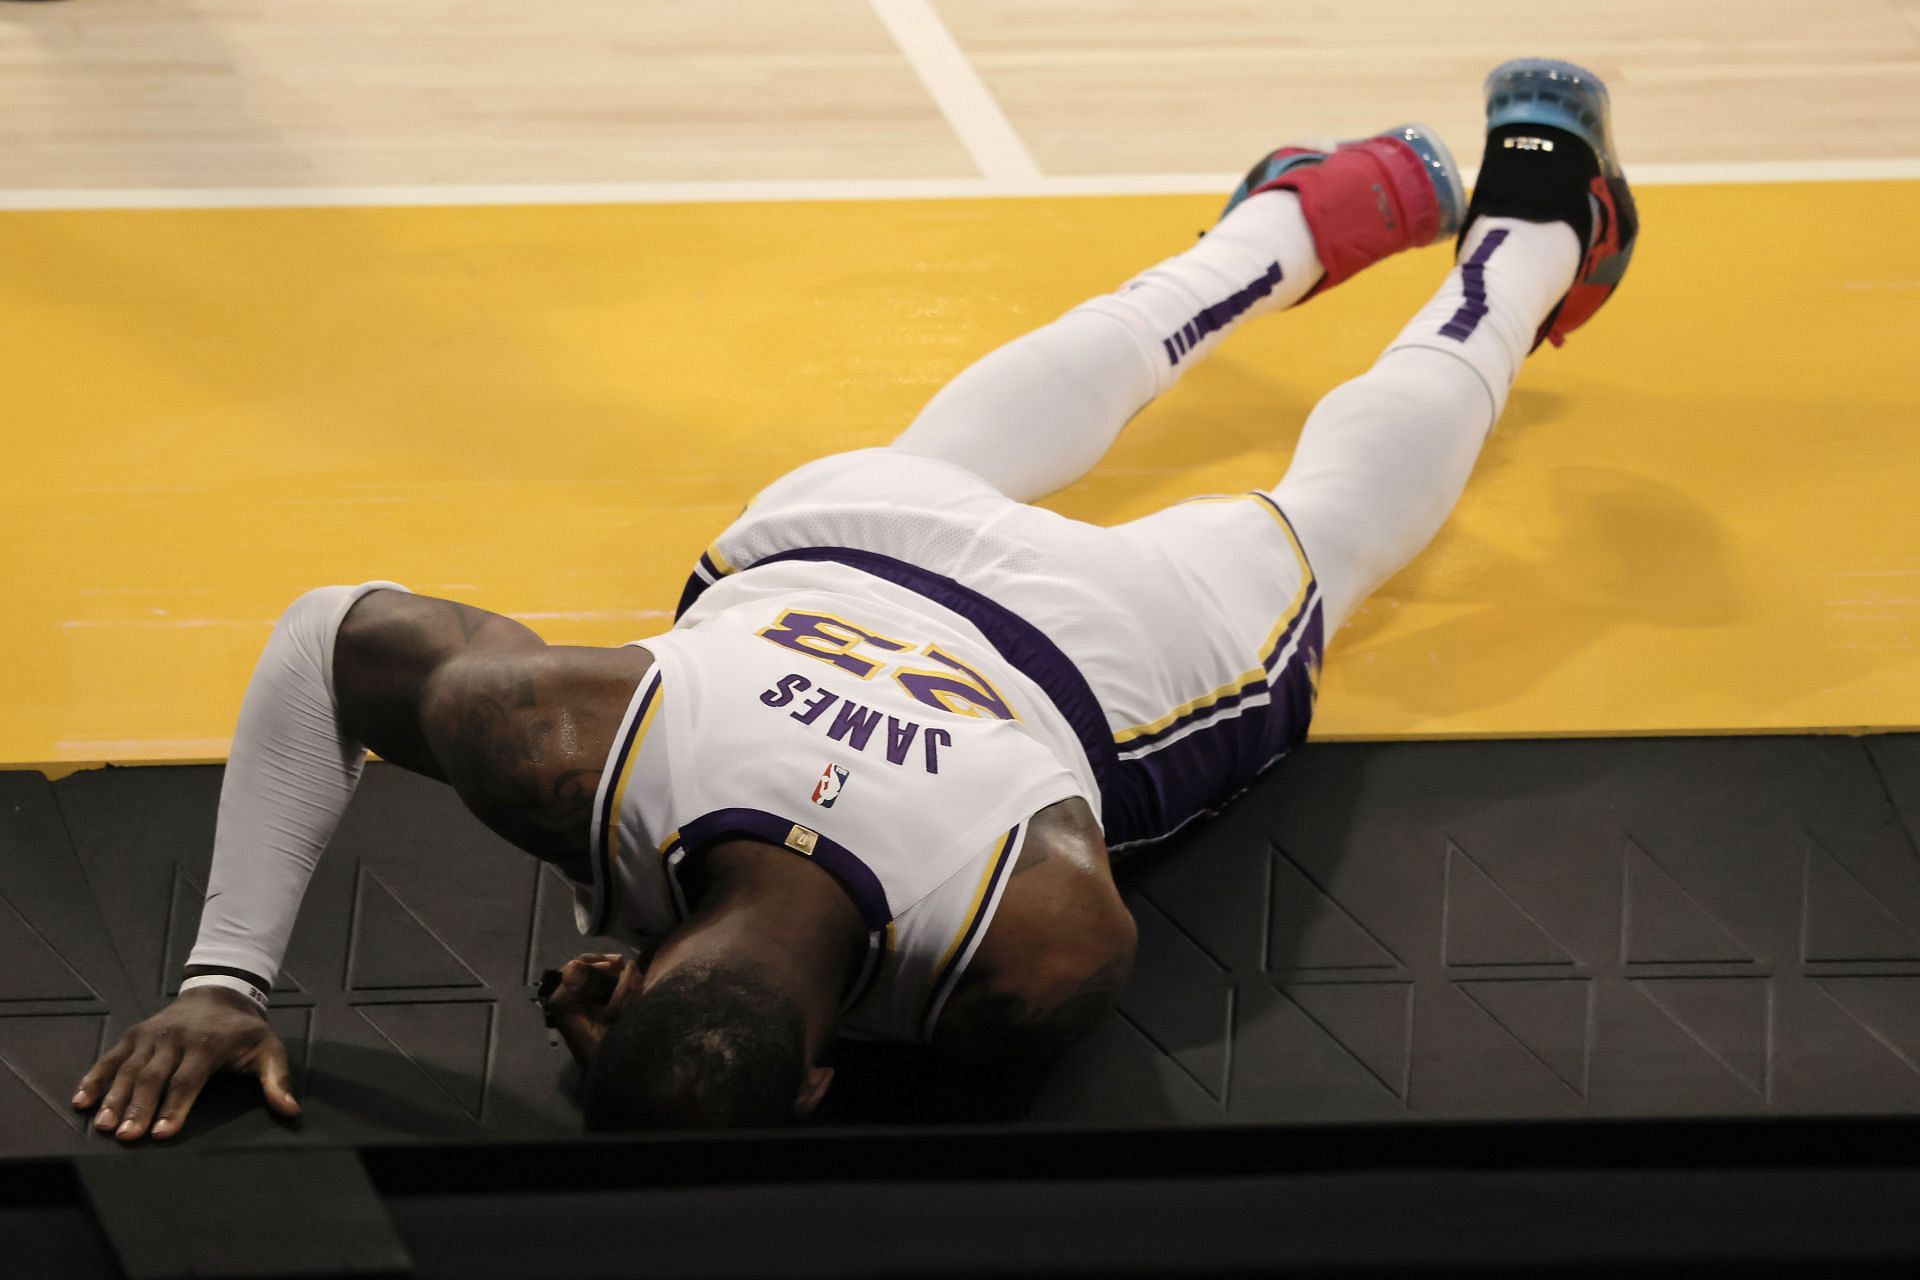 LeBron James of the Los Angeles Lakers after injuring his ankle last season.